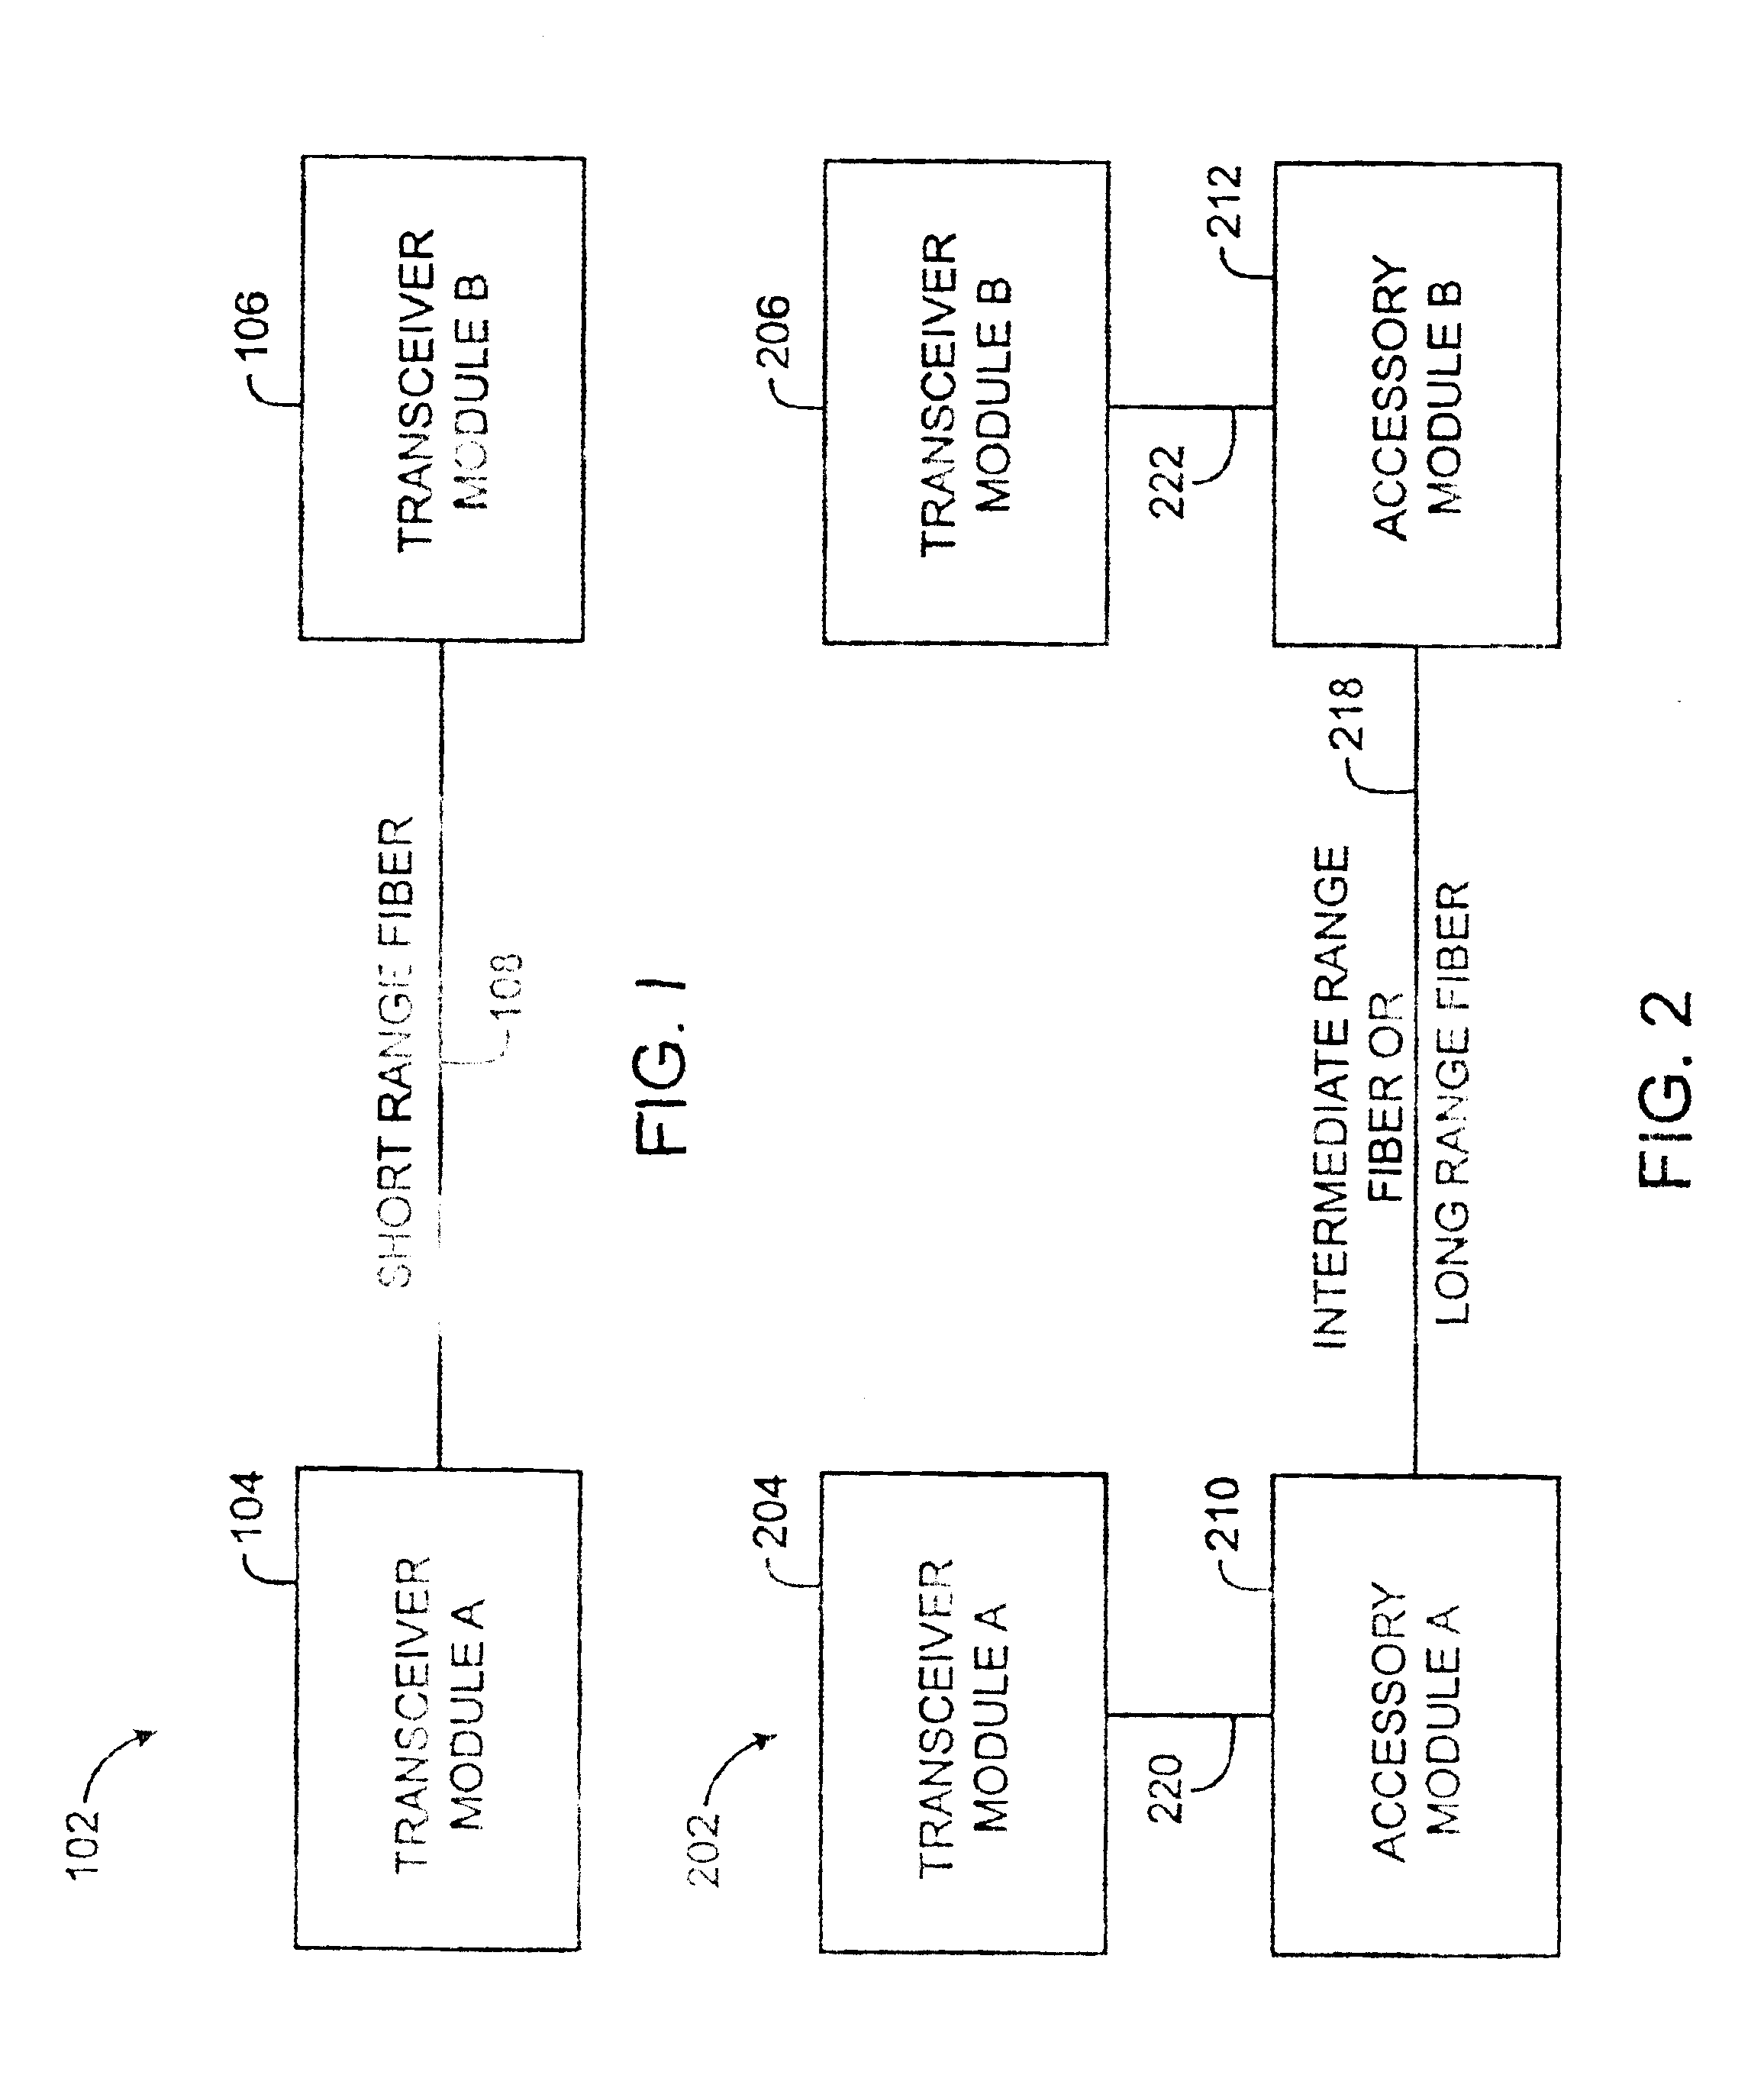 Modular transceiver and accessory system for use in an optical network